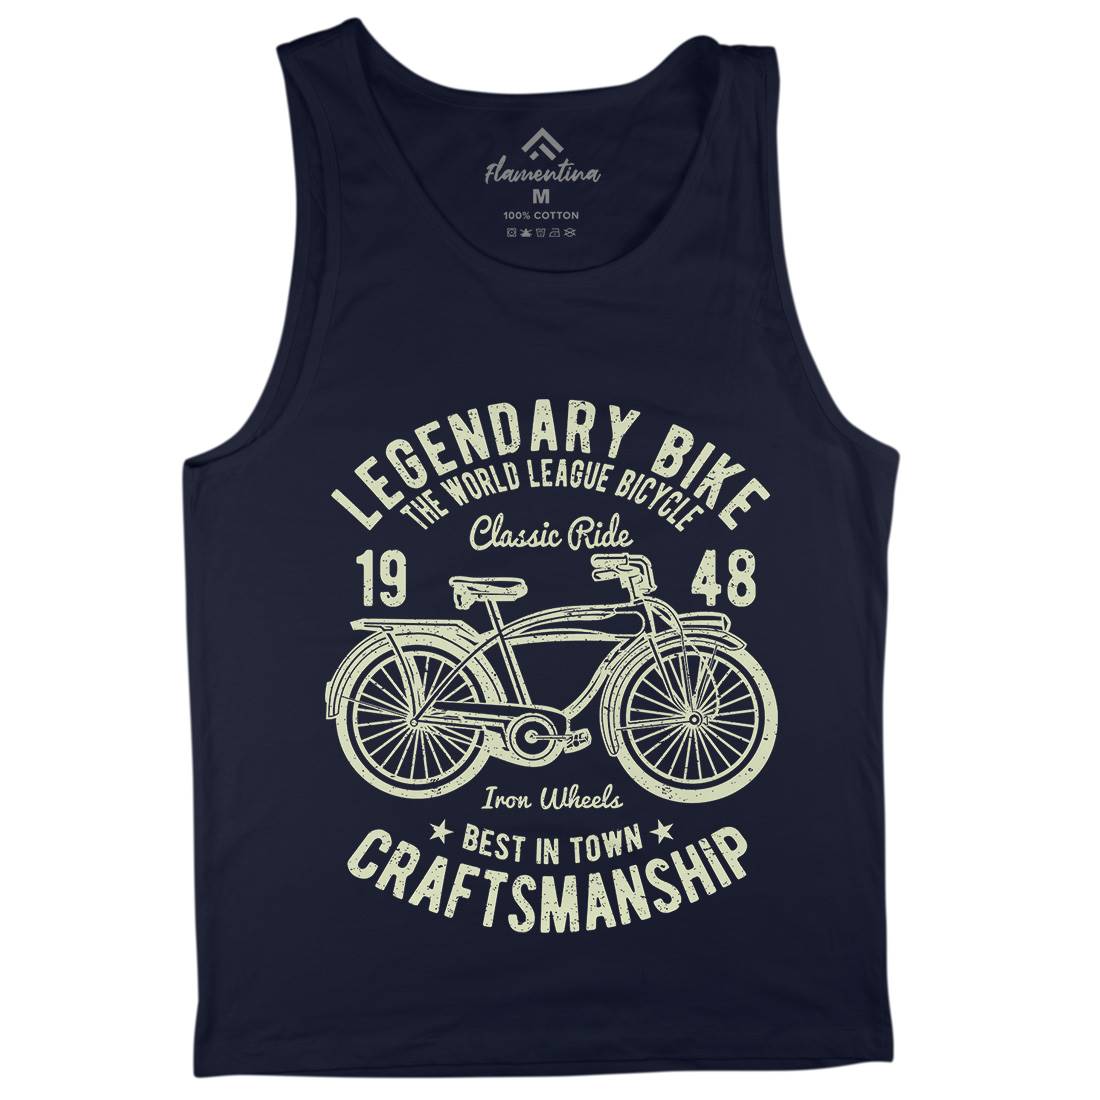 Classic Bicycle Mens Tank Top Vest Bikes A035